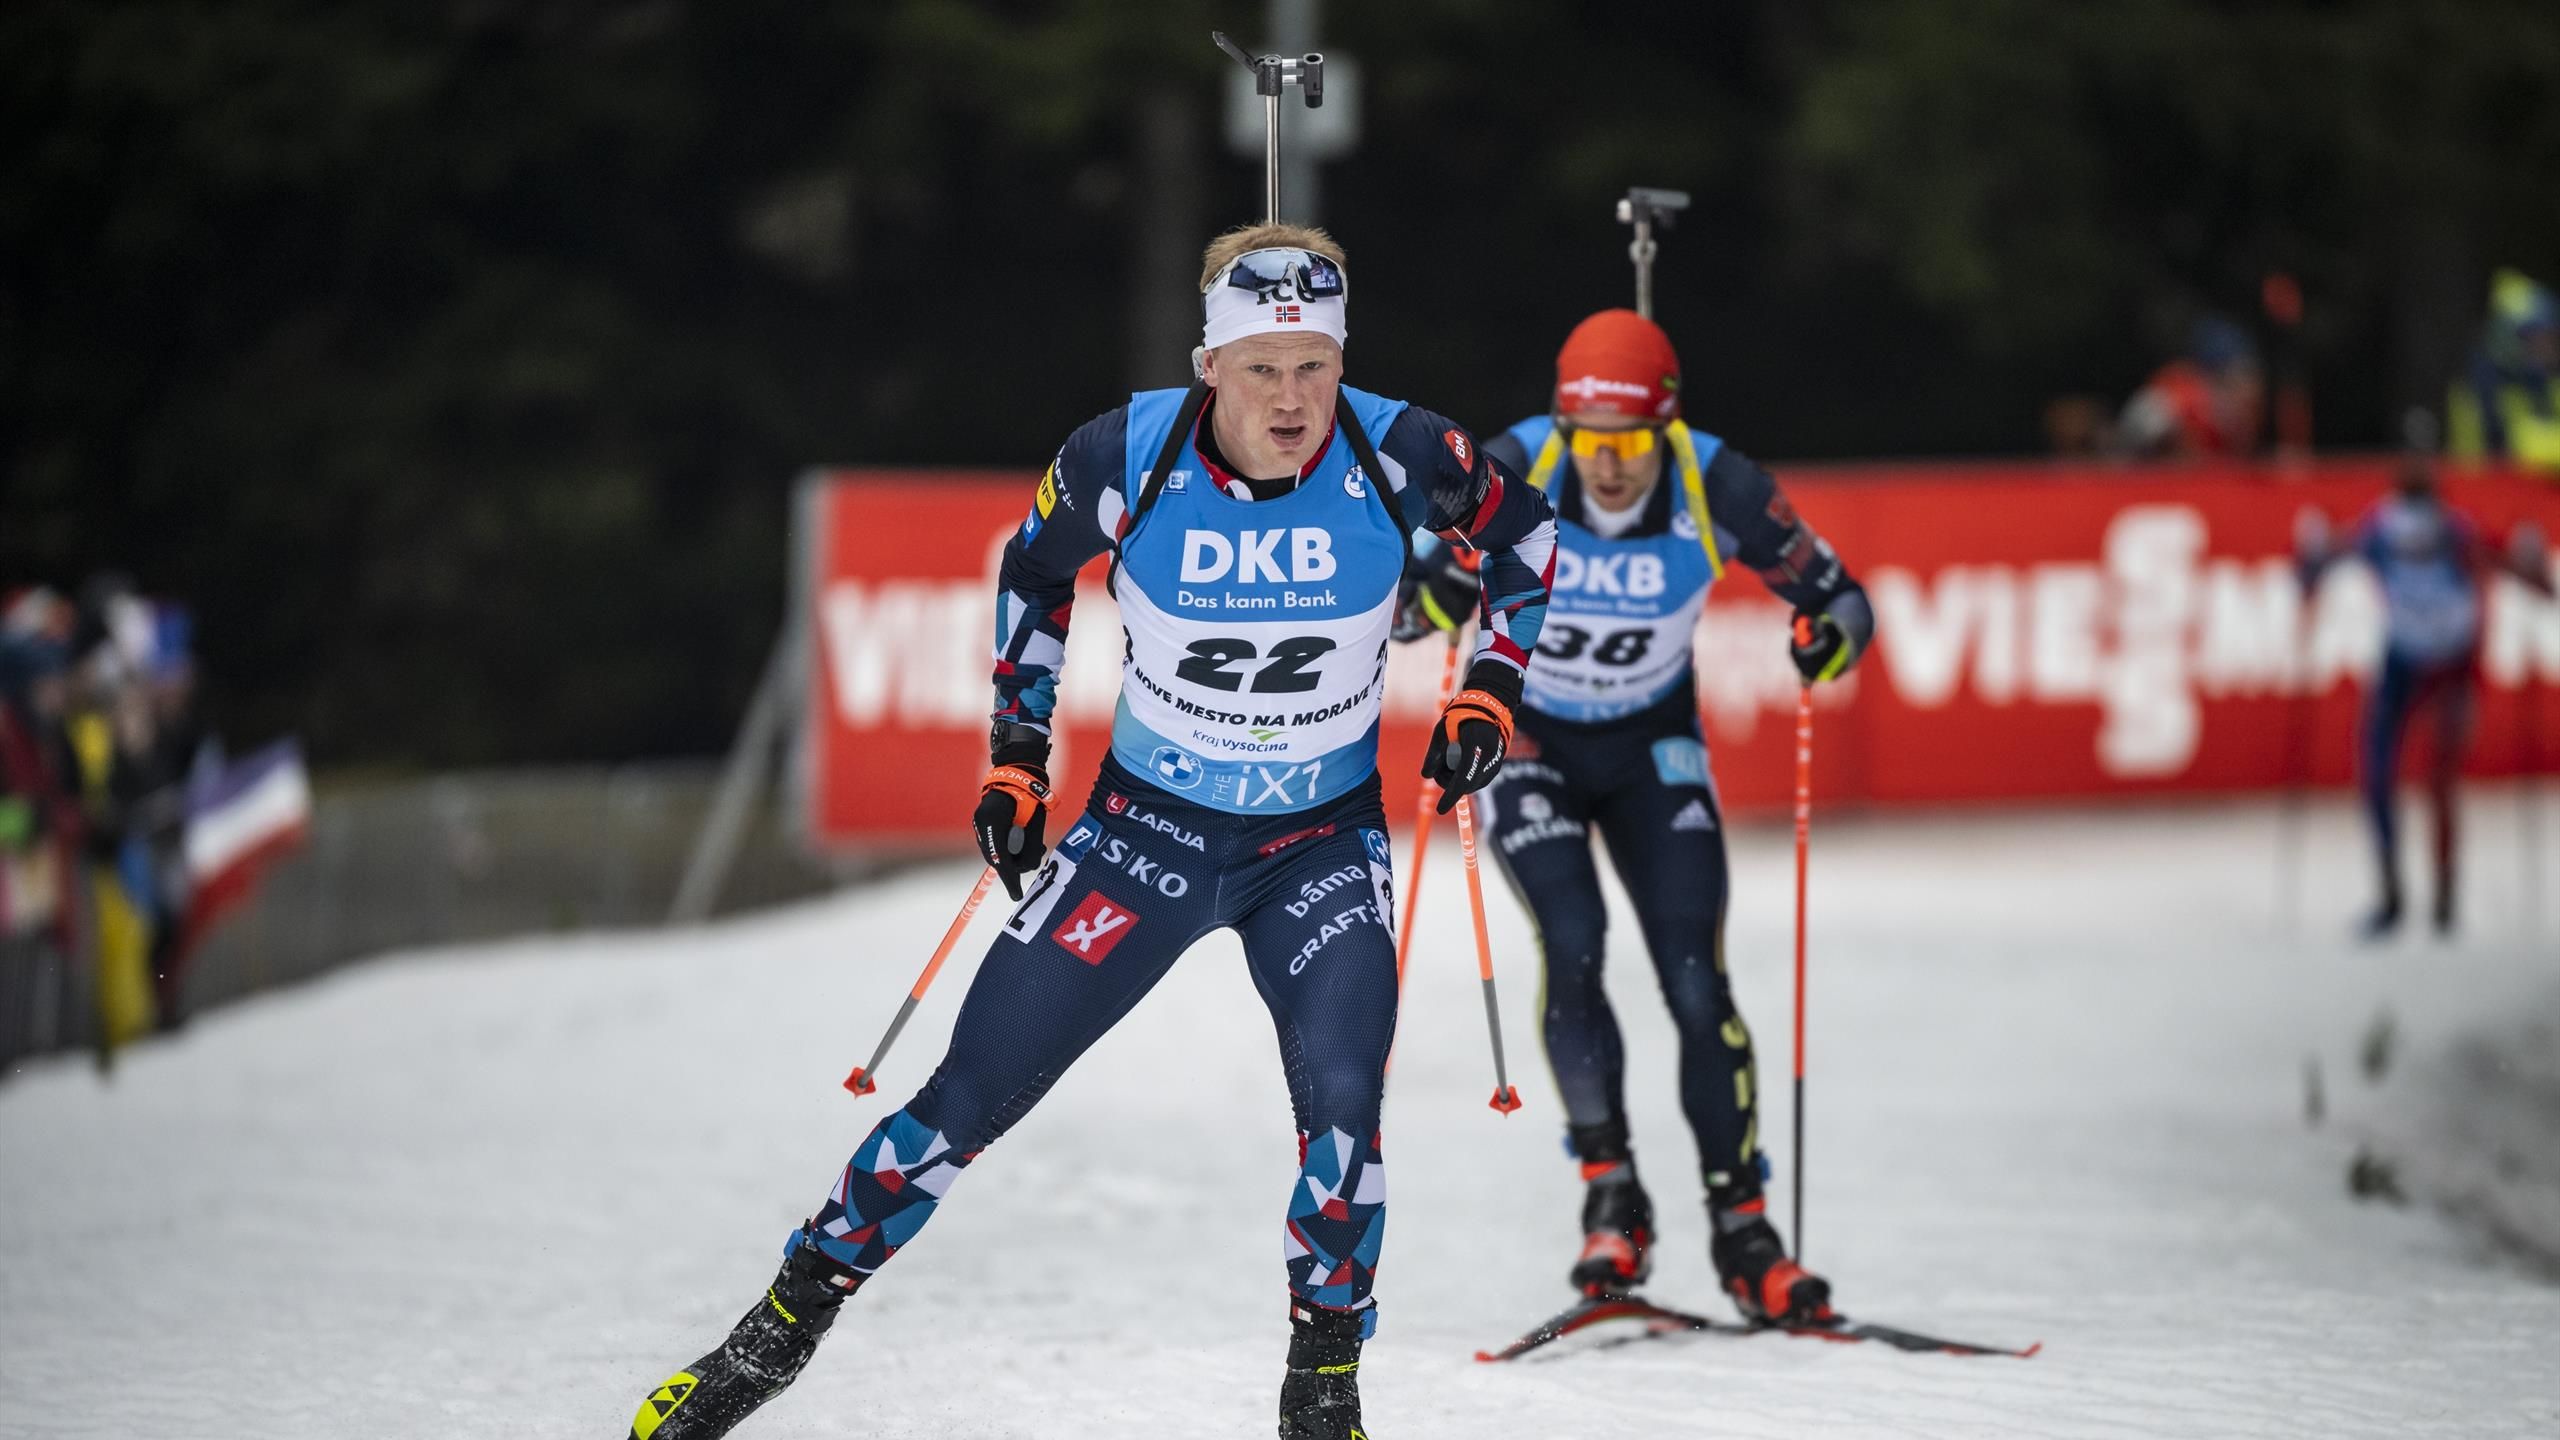 Norway at the double in relays in Ostersund as Stroemsheim, Soerum, Dale and Sjaastad Christiansen succeed